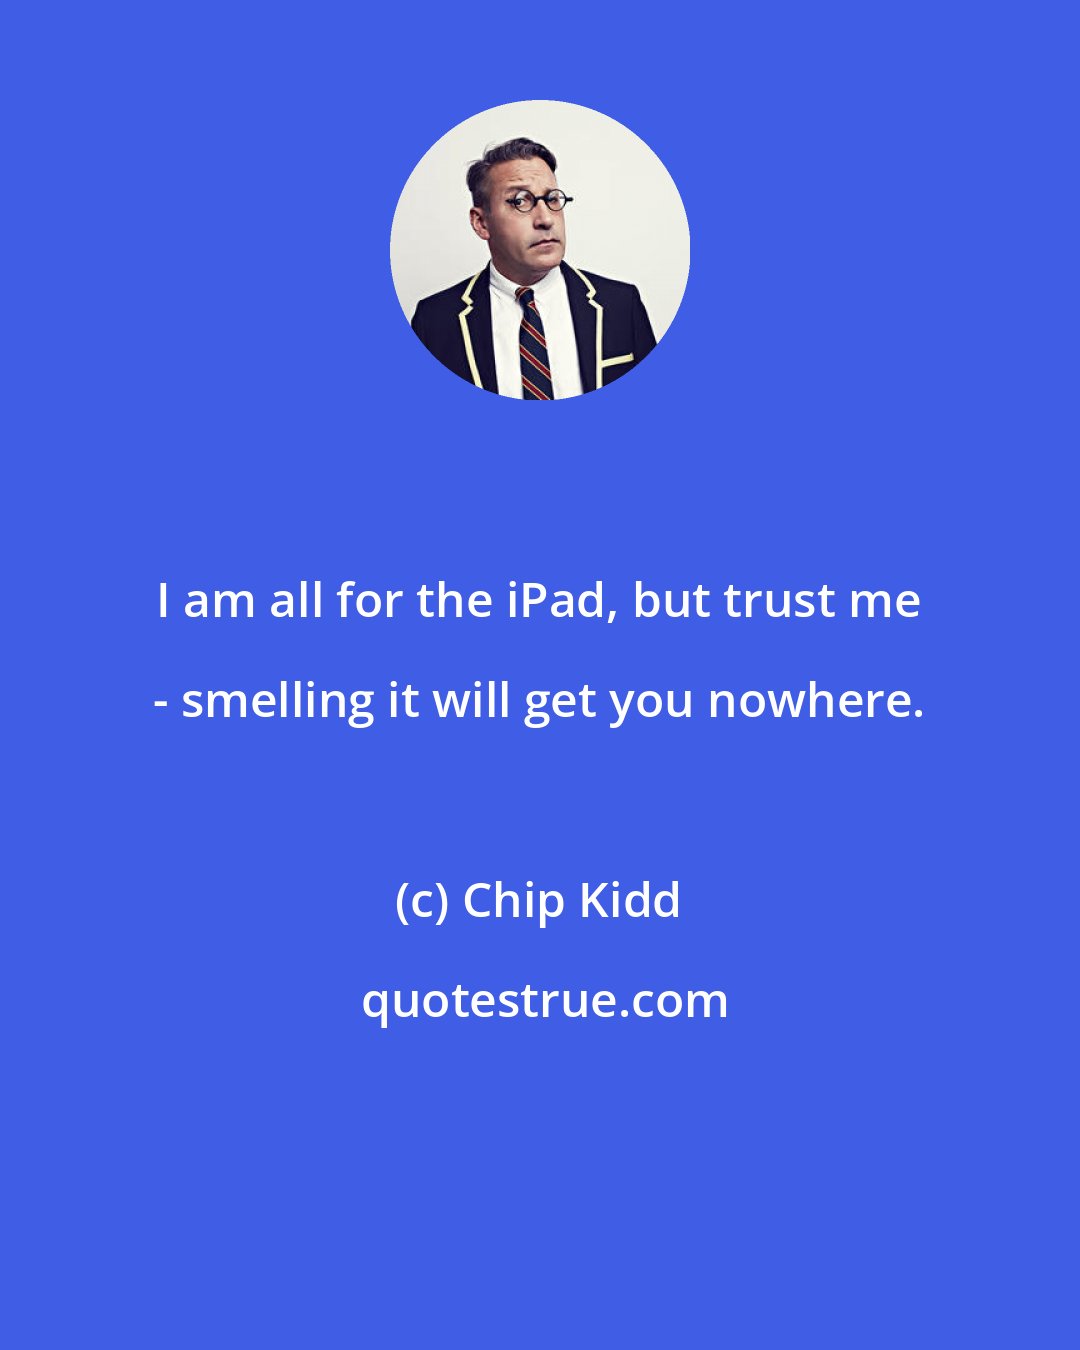 Chip Kidd: I am all for the iPad, but trust me - smelling it will get you nowhere.